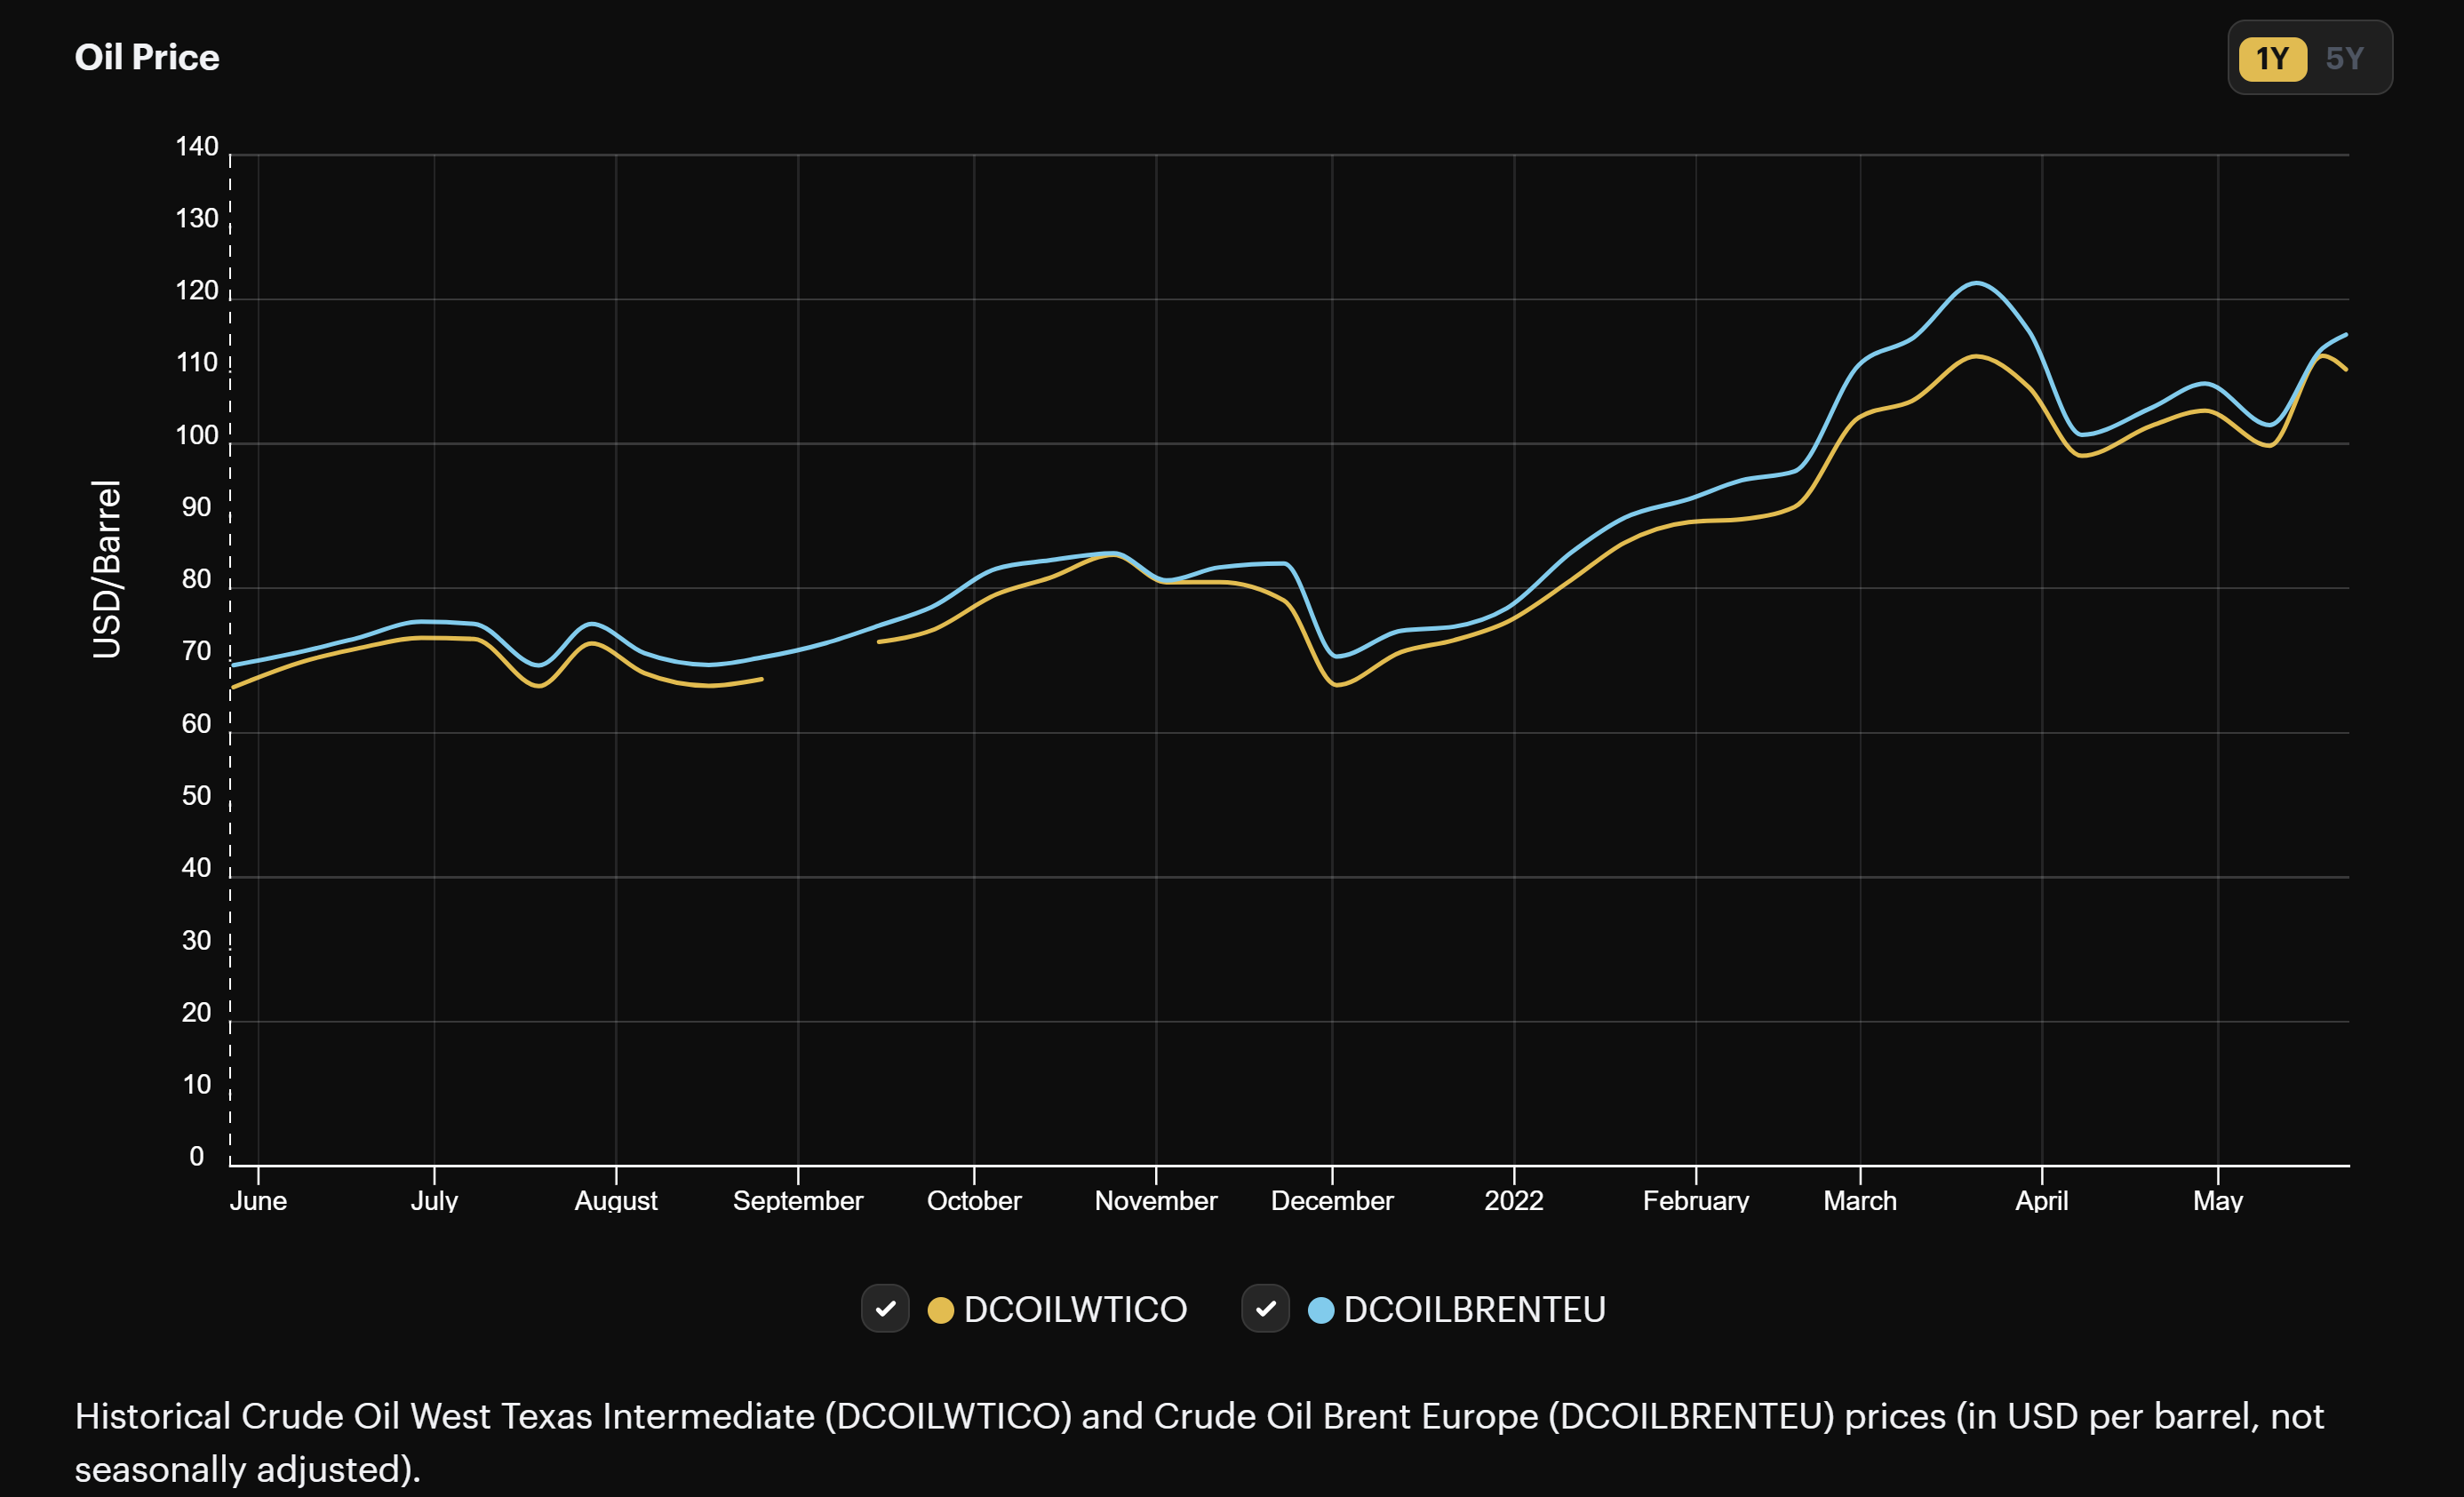 Crude Oil West Texas vs. Crude Oil Brent Europe prices | Source: Hashrate Index Energy Markets Dashboard